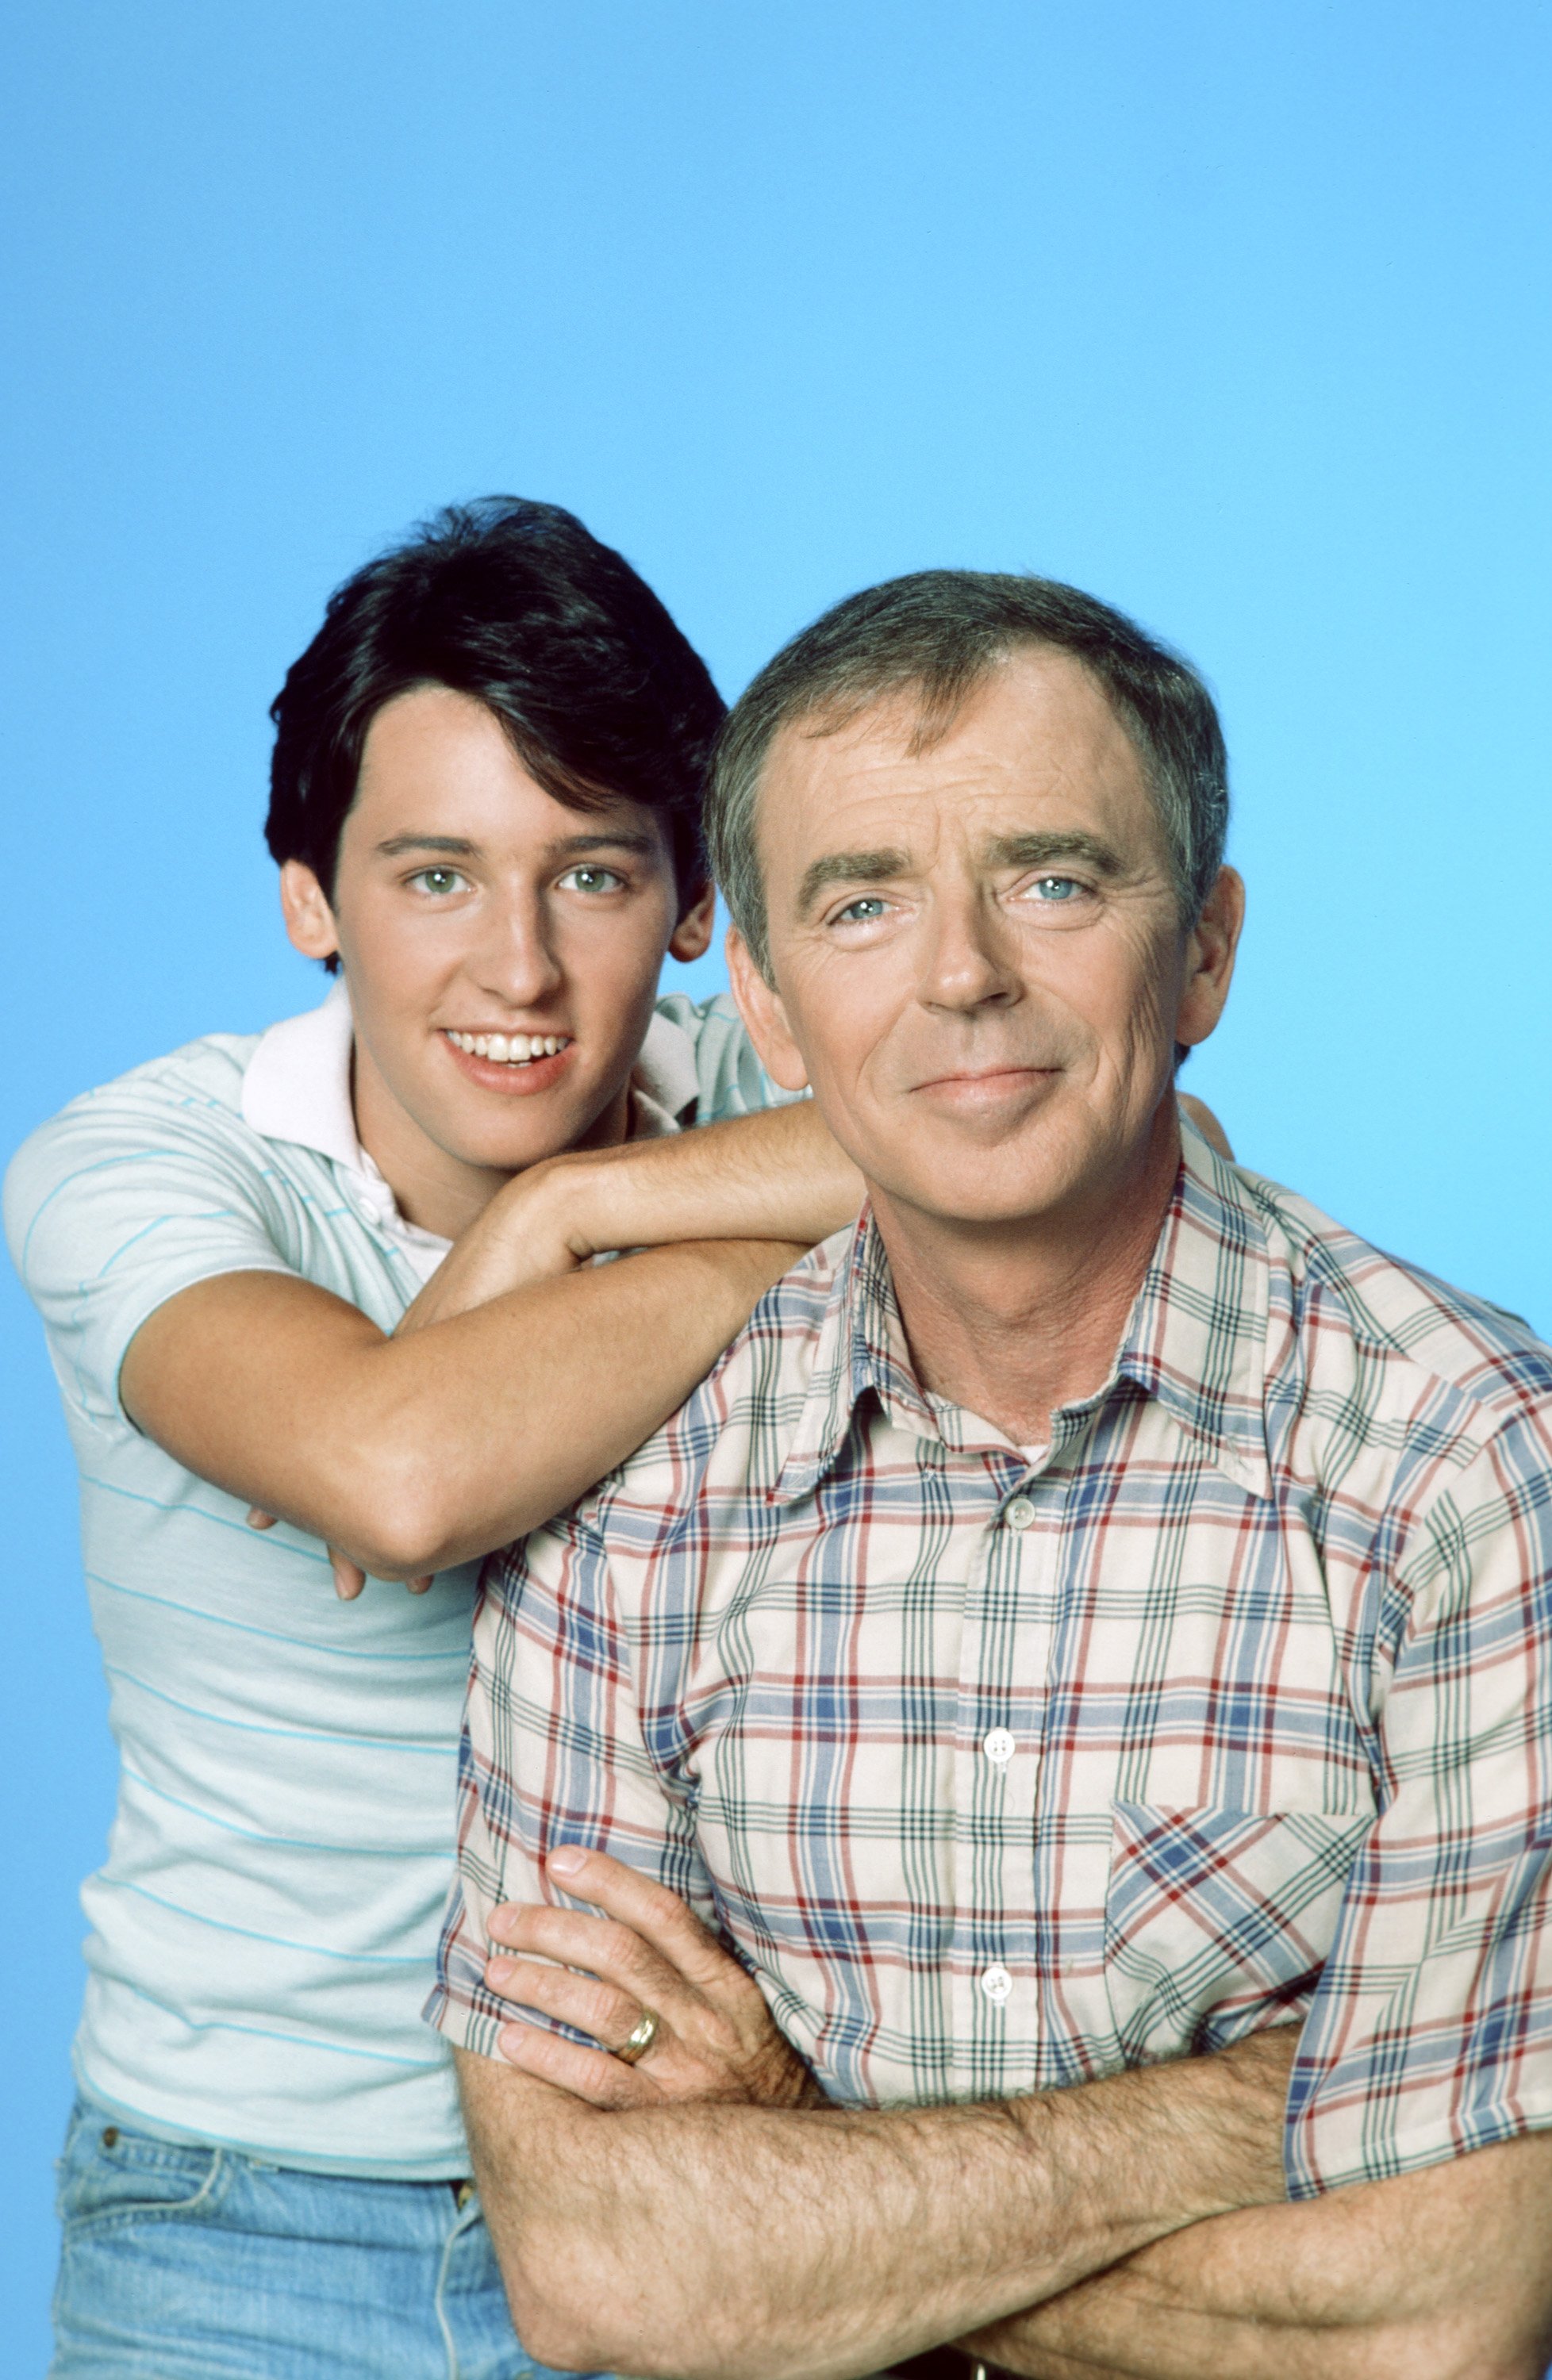 Eric Brown and Ken Berry on "Mama's Family" | Source: Getty Images